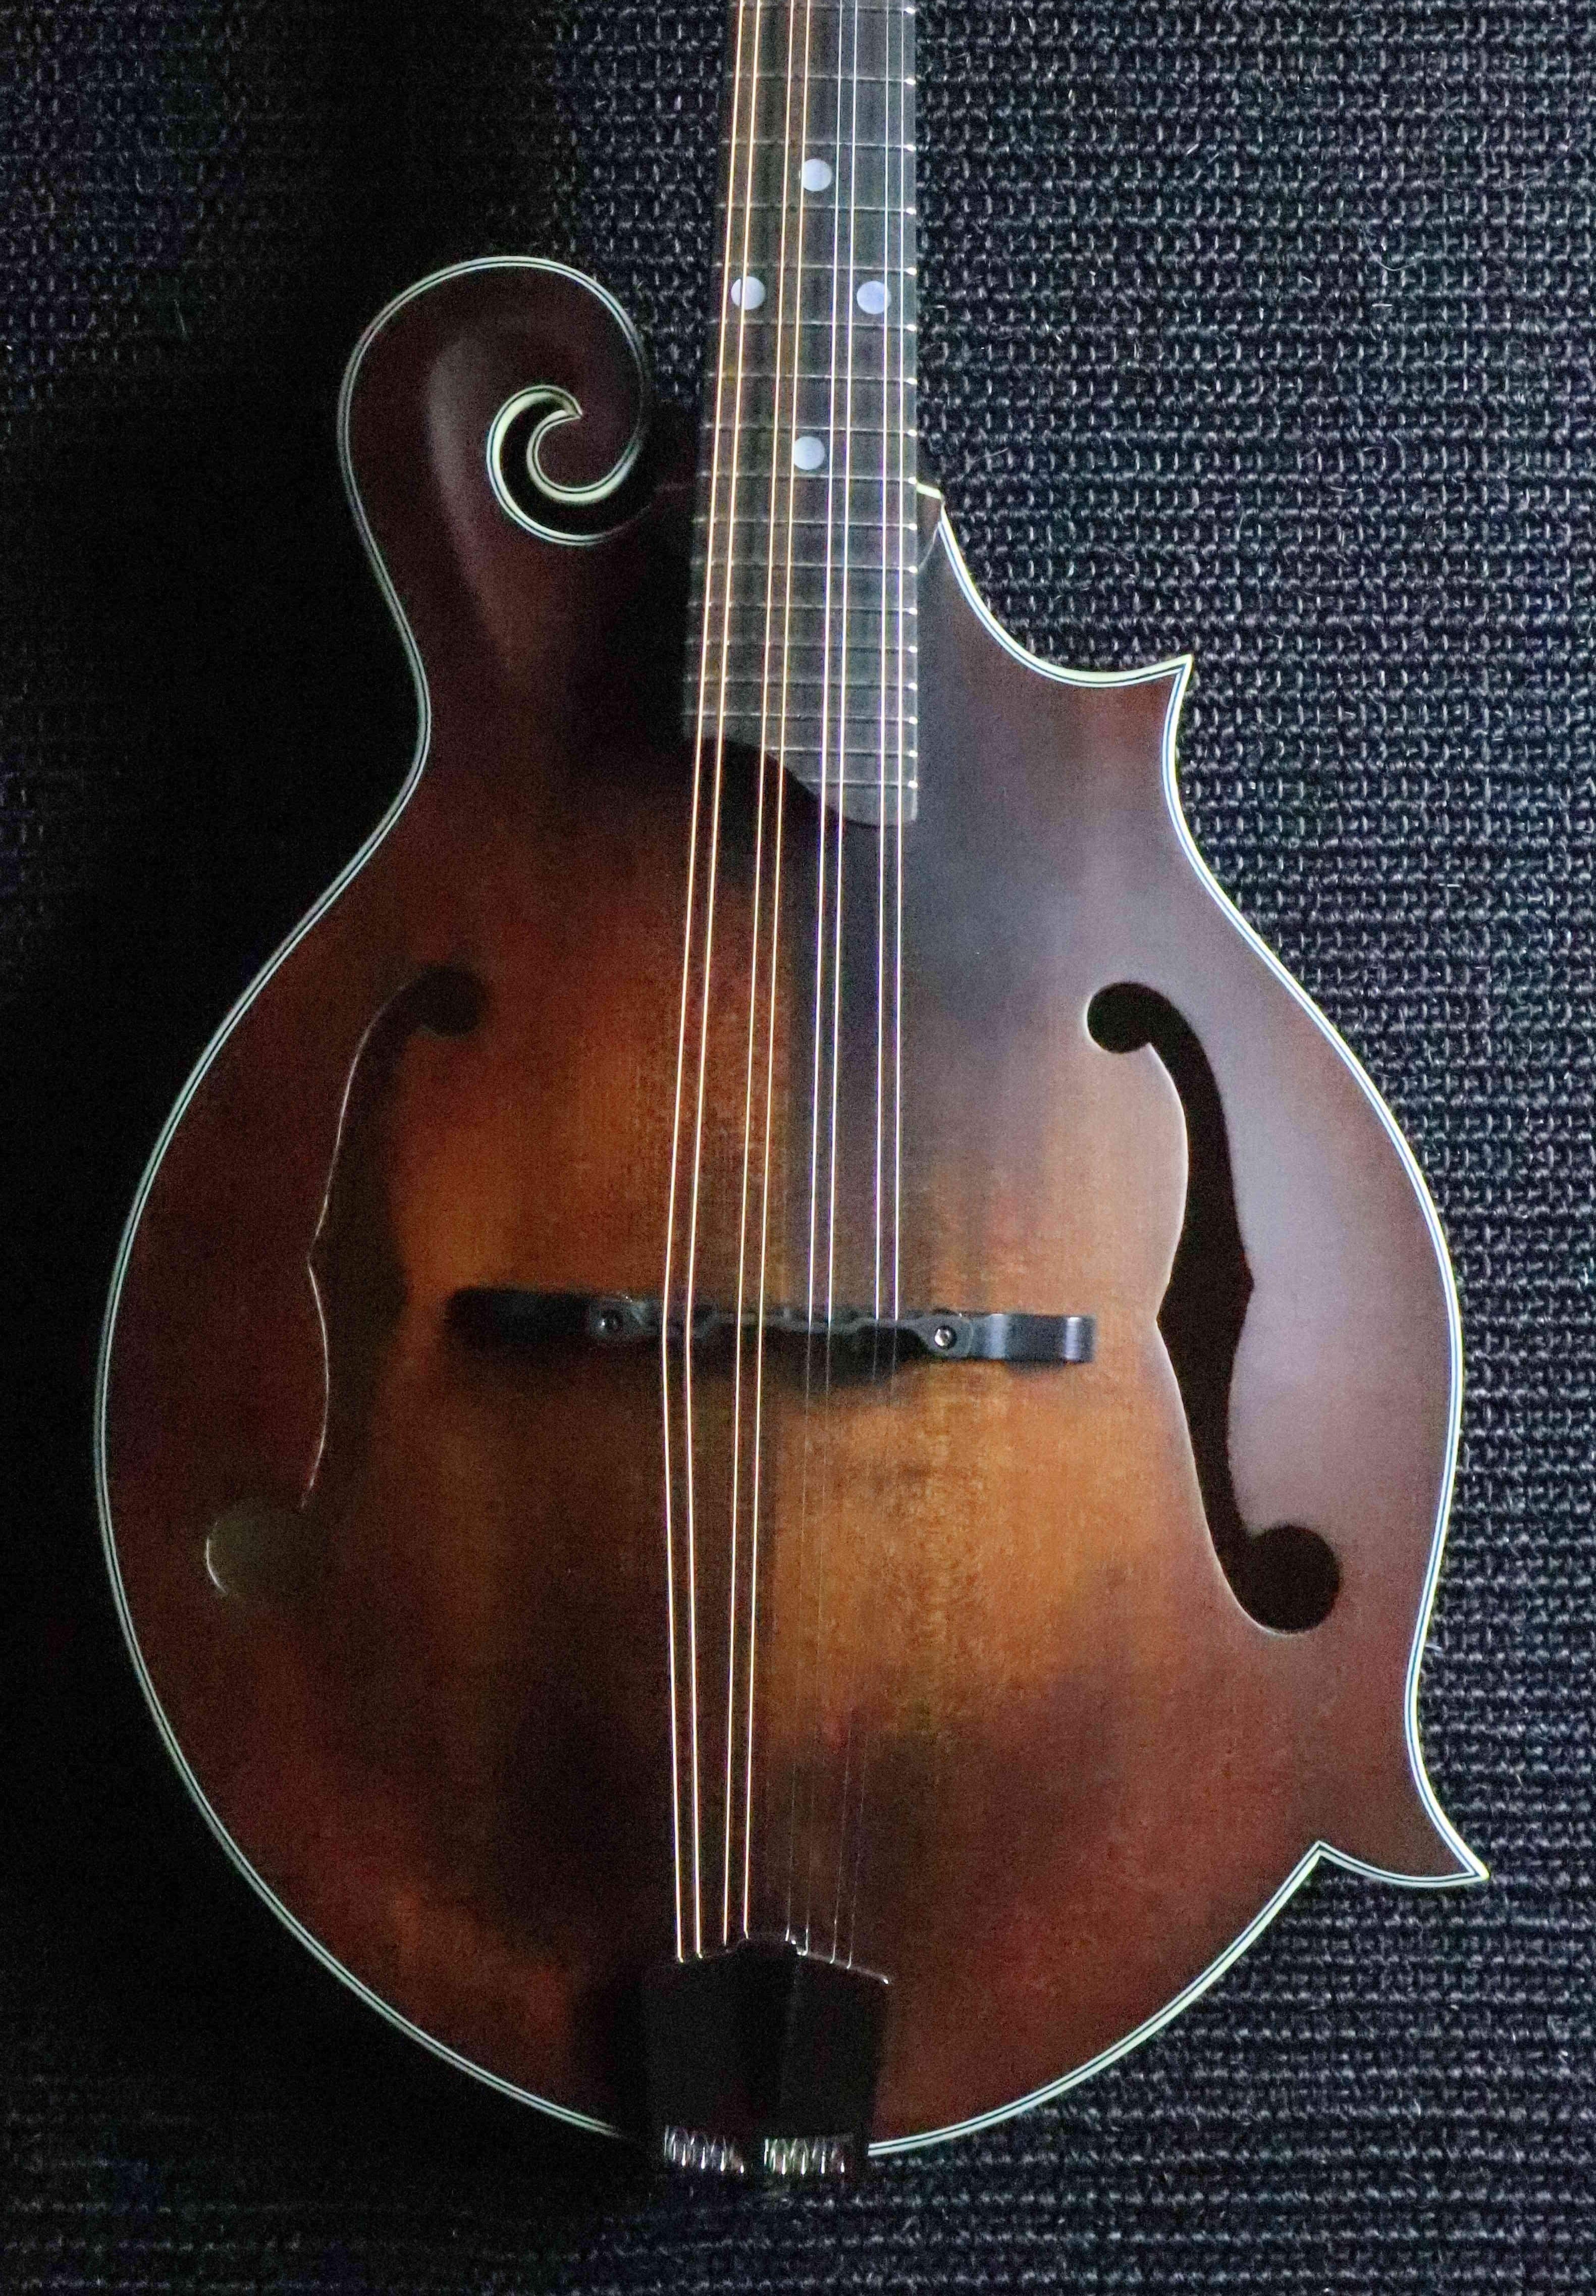 Eastman MD315L F-style Mandolin (F-holes, Solid Spruce top, Solid Maple back and sides, w/Gigbag), Mandolin for sale at Richards Guitars.